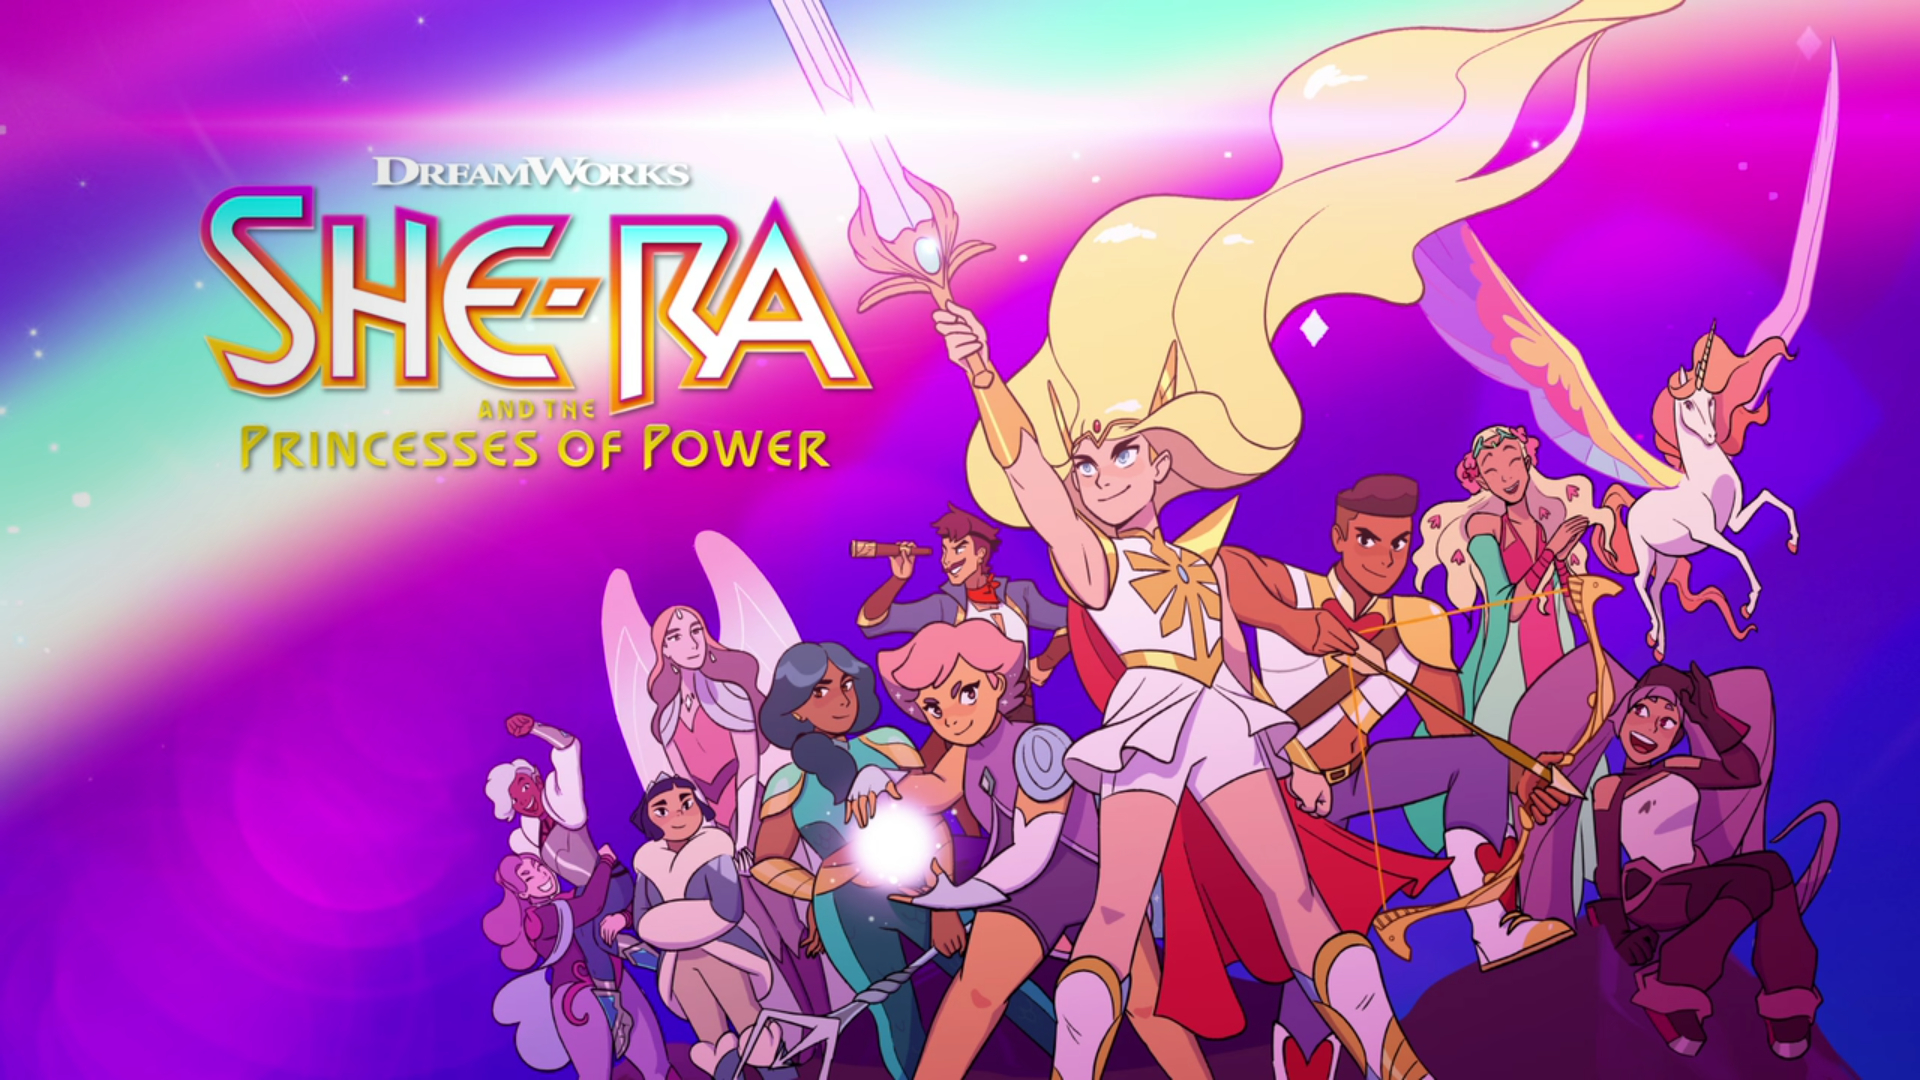 1920x1080 She-Ra: the Princess of the Power Wallpapers Top Free She-Ra: the Princess of the Power Backgrounds